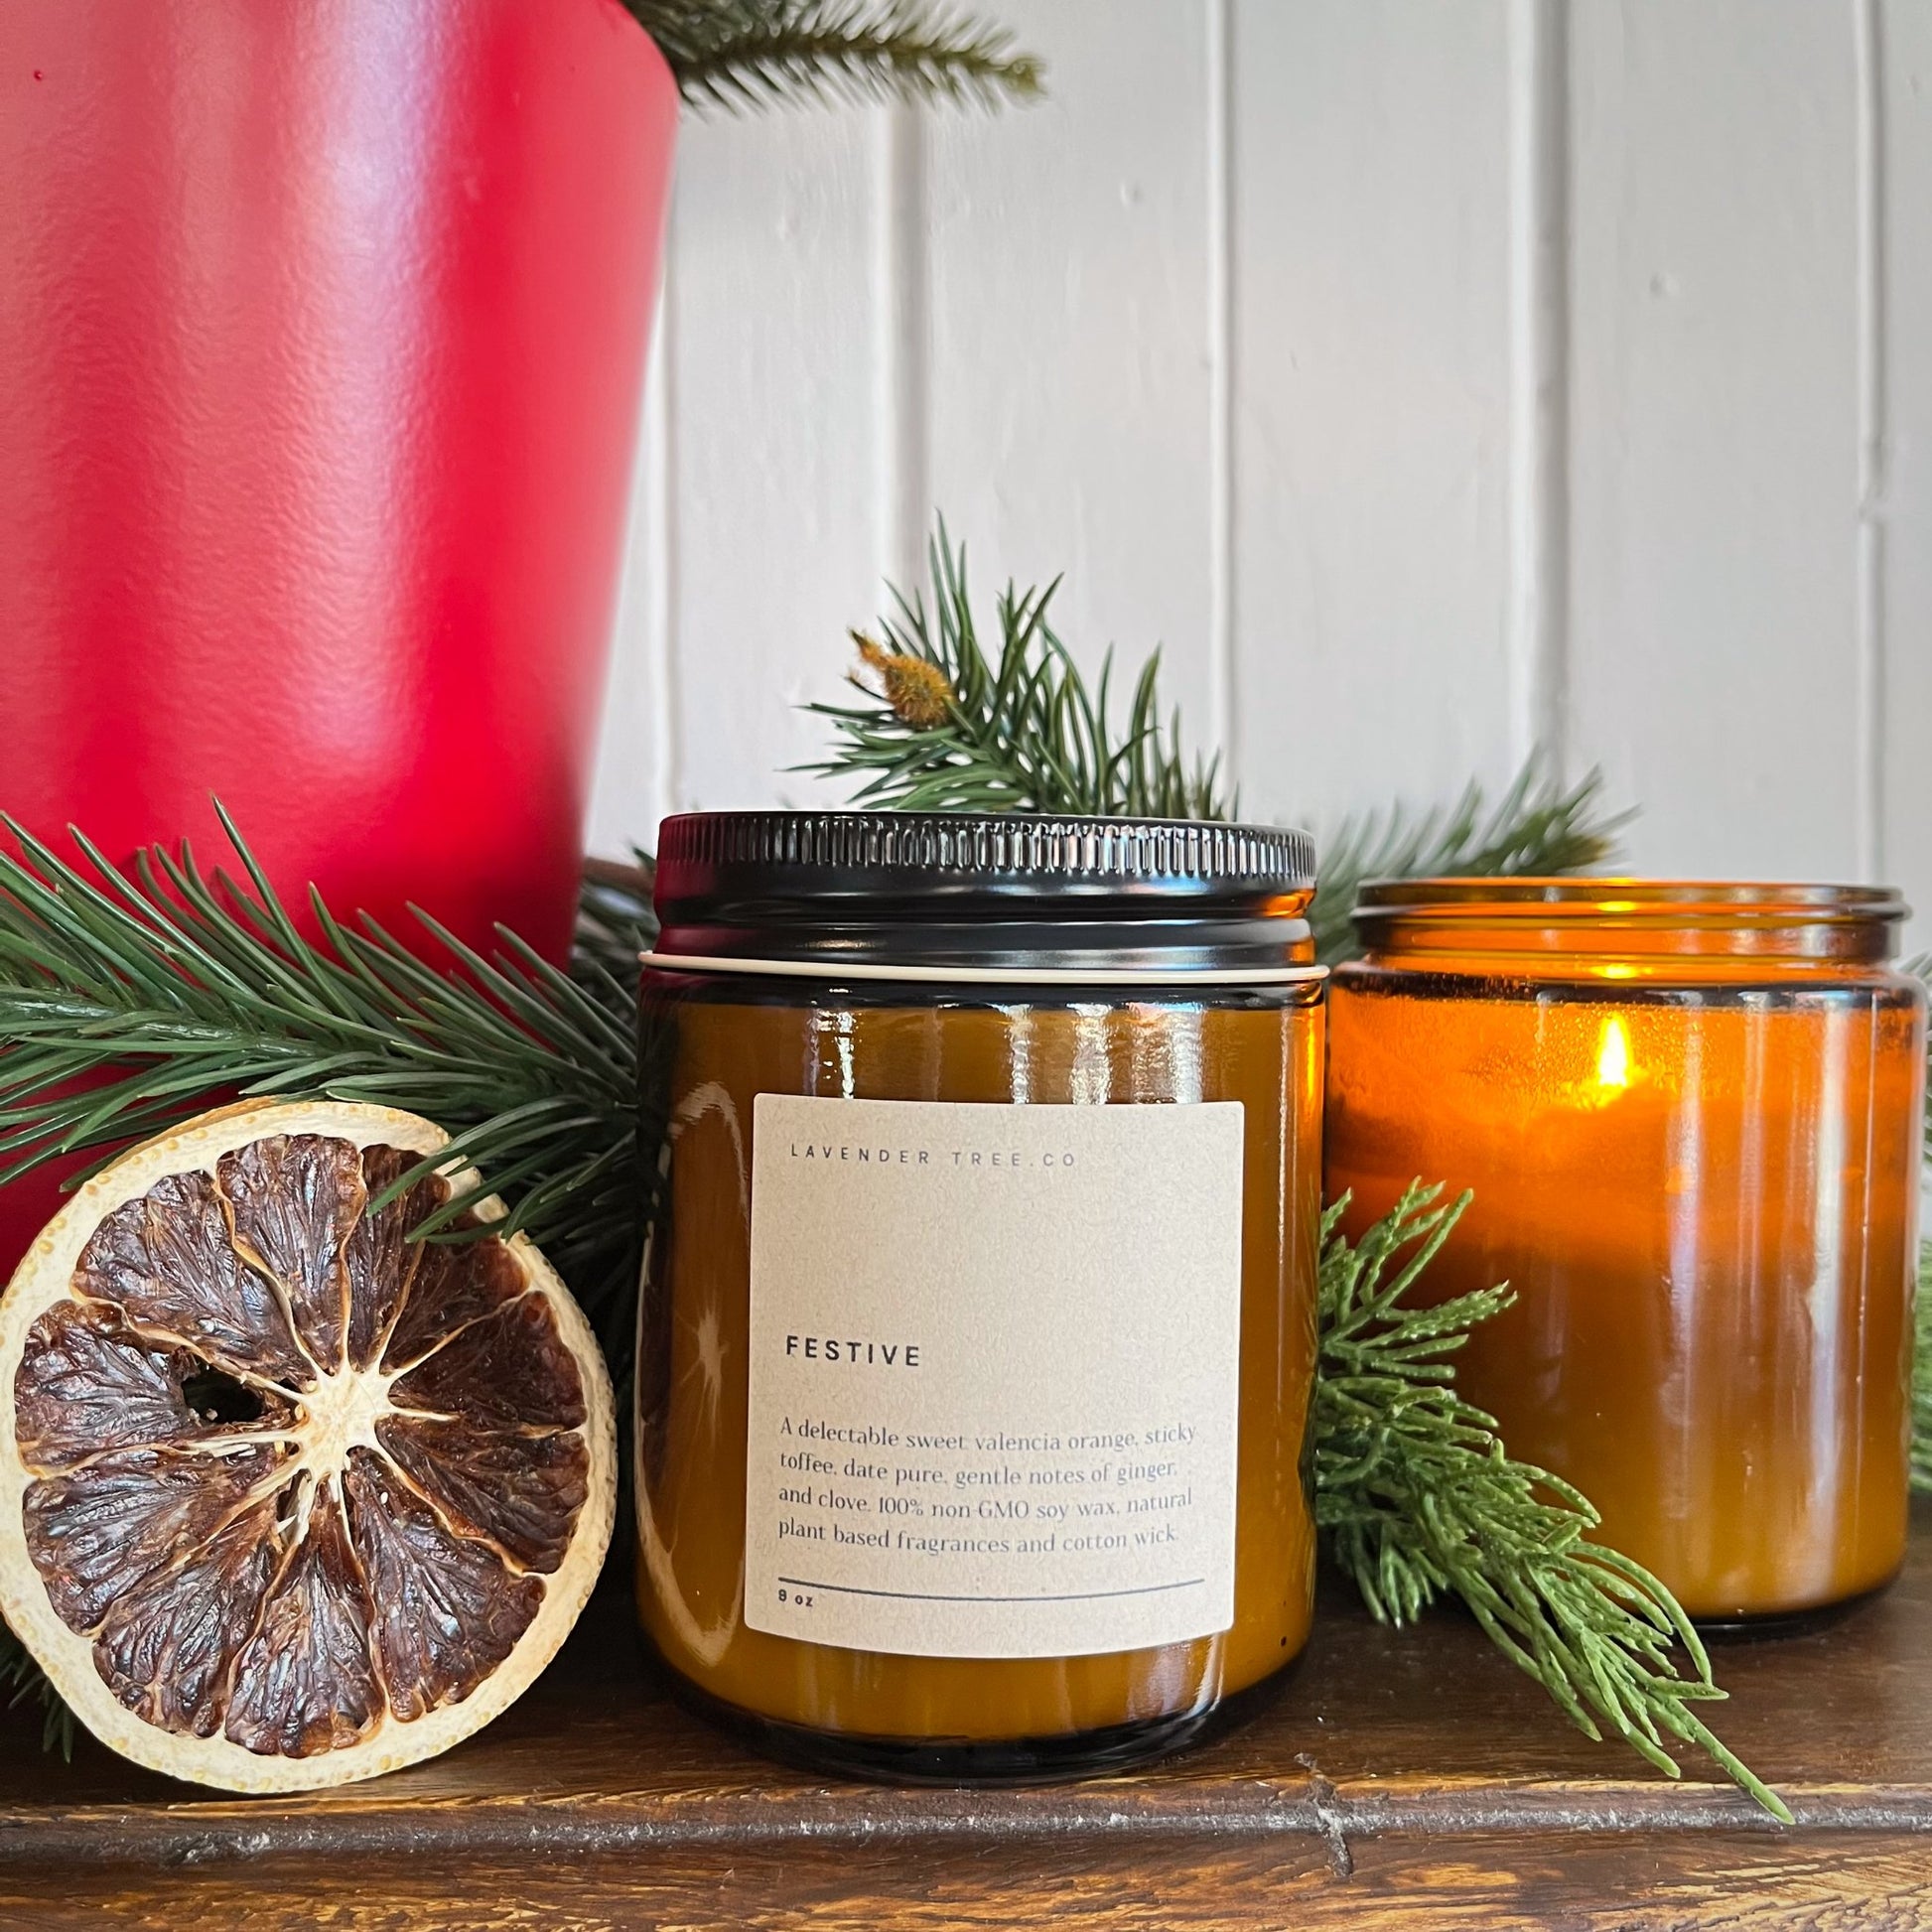 Lavender Tree Co. - Lavender Tree Co Festive Candle - ORESTA clean beauty simplified